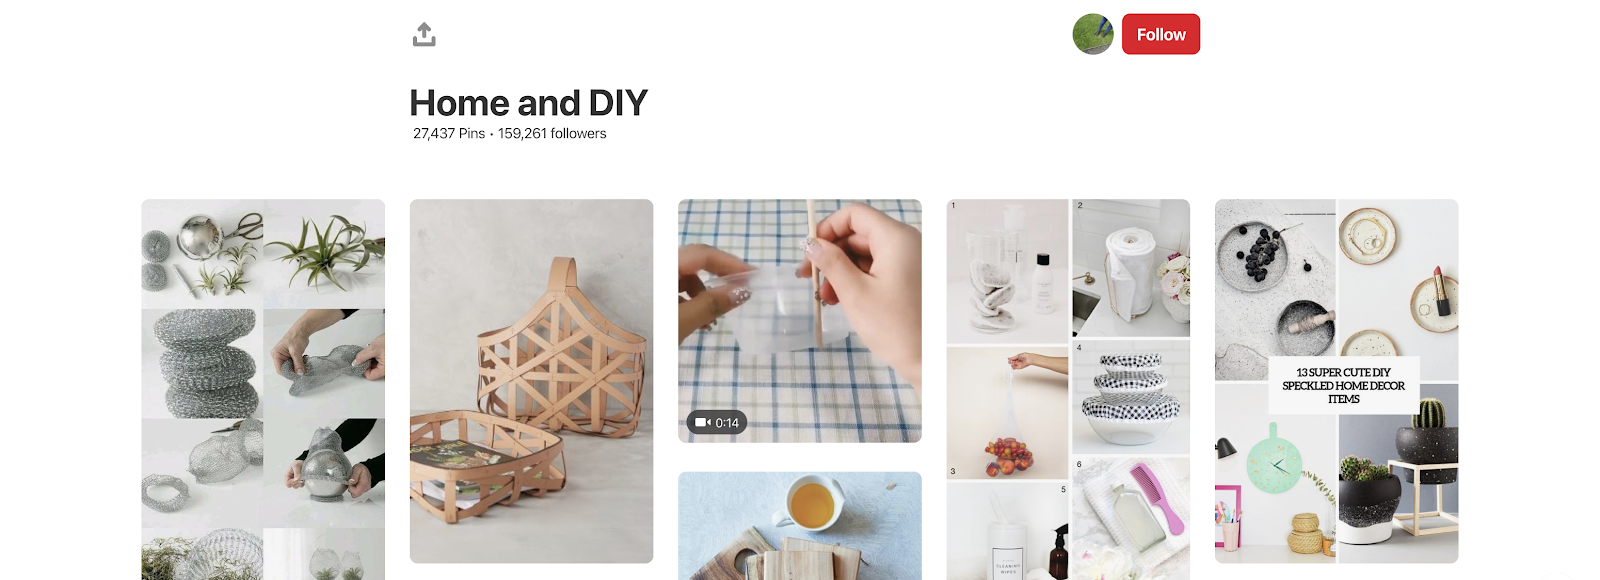 Pinterest Home and DIY board